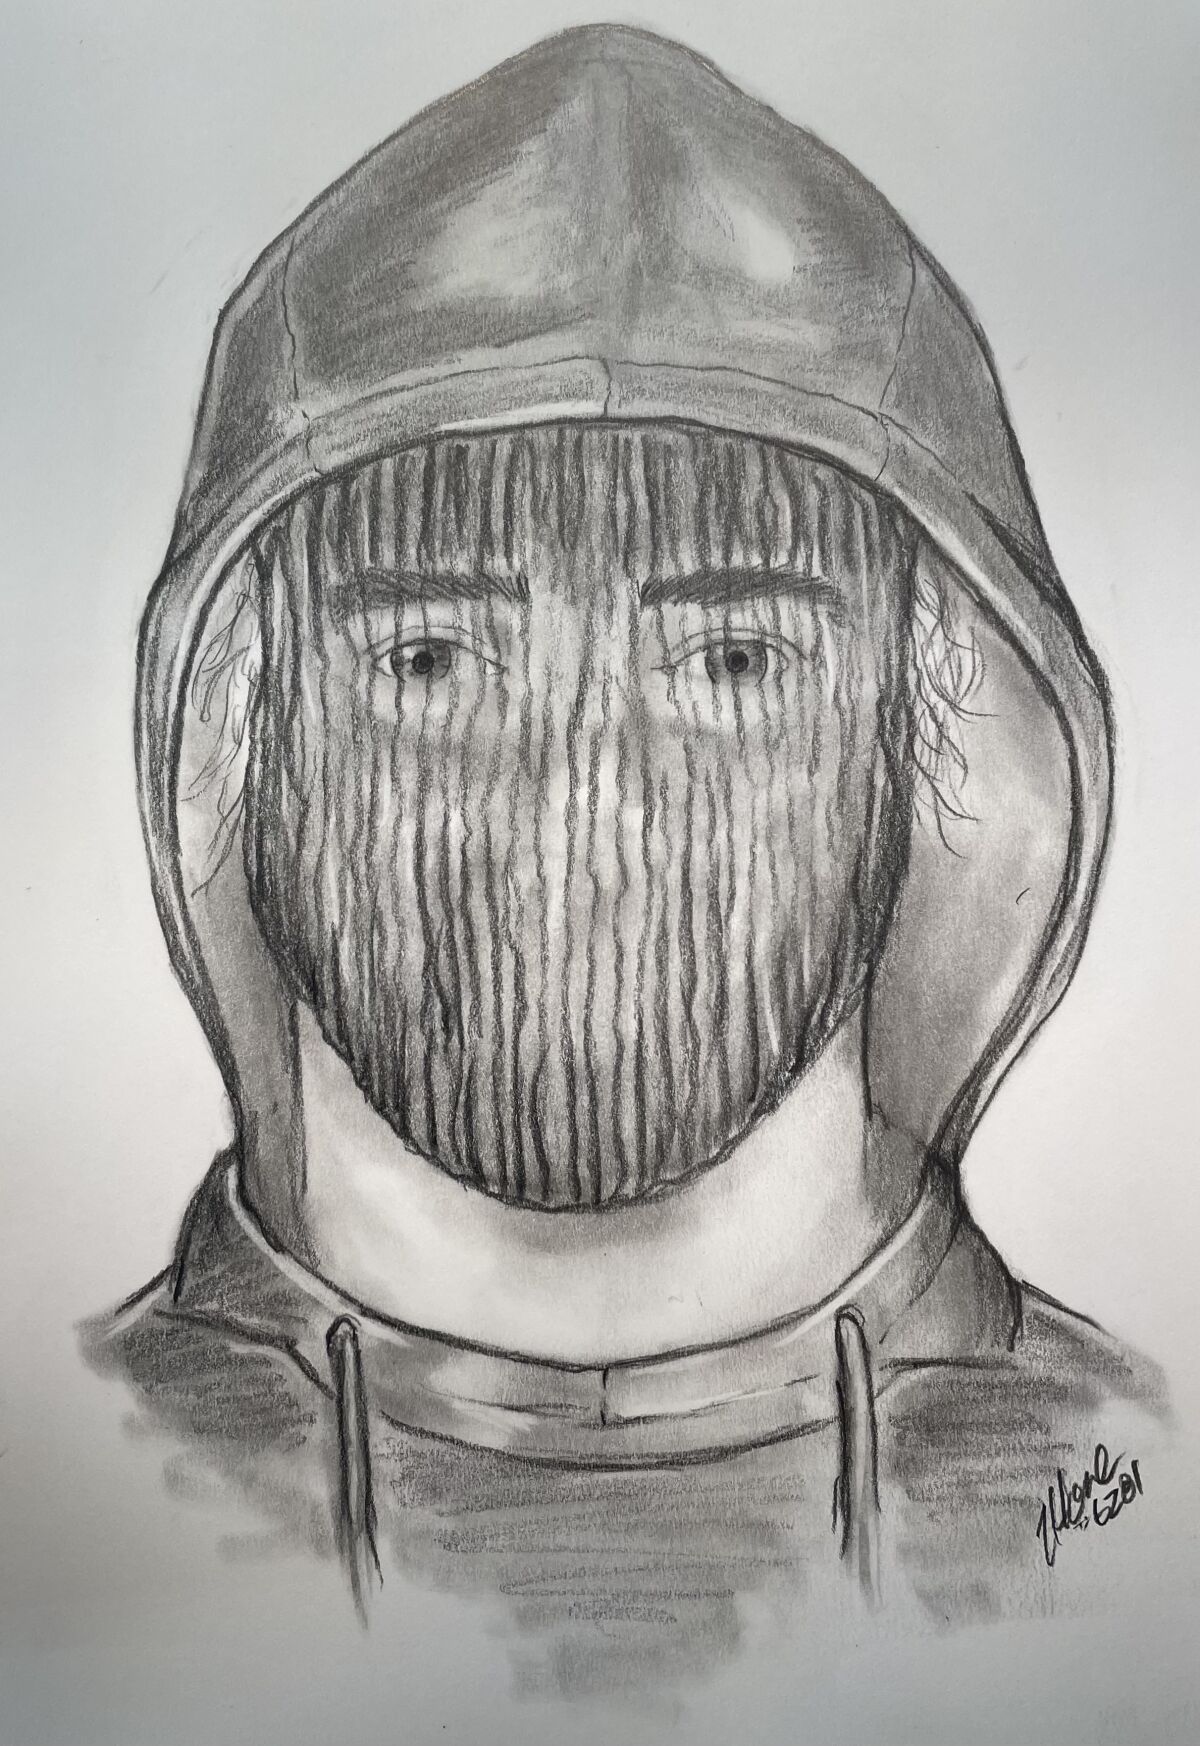 San Diego police released a composite sketch of a suspect in a kidnapping attempt.